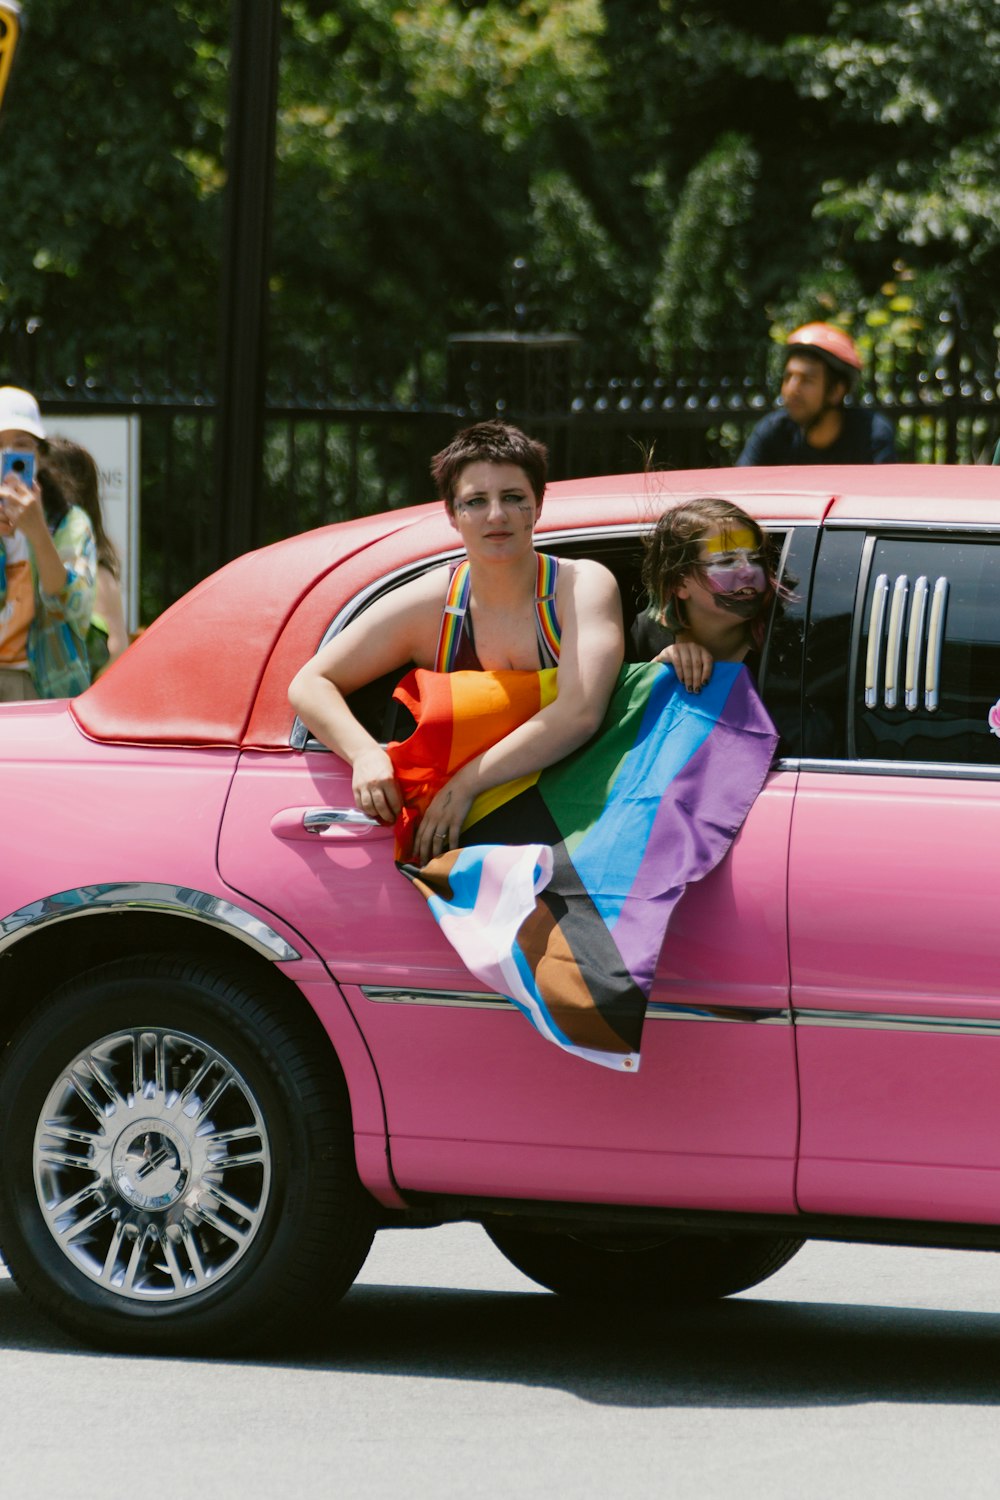 a woman in a bikini sitting on the back of a pink car